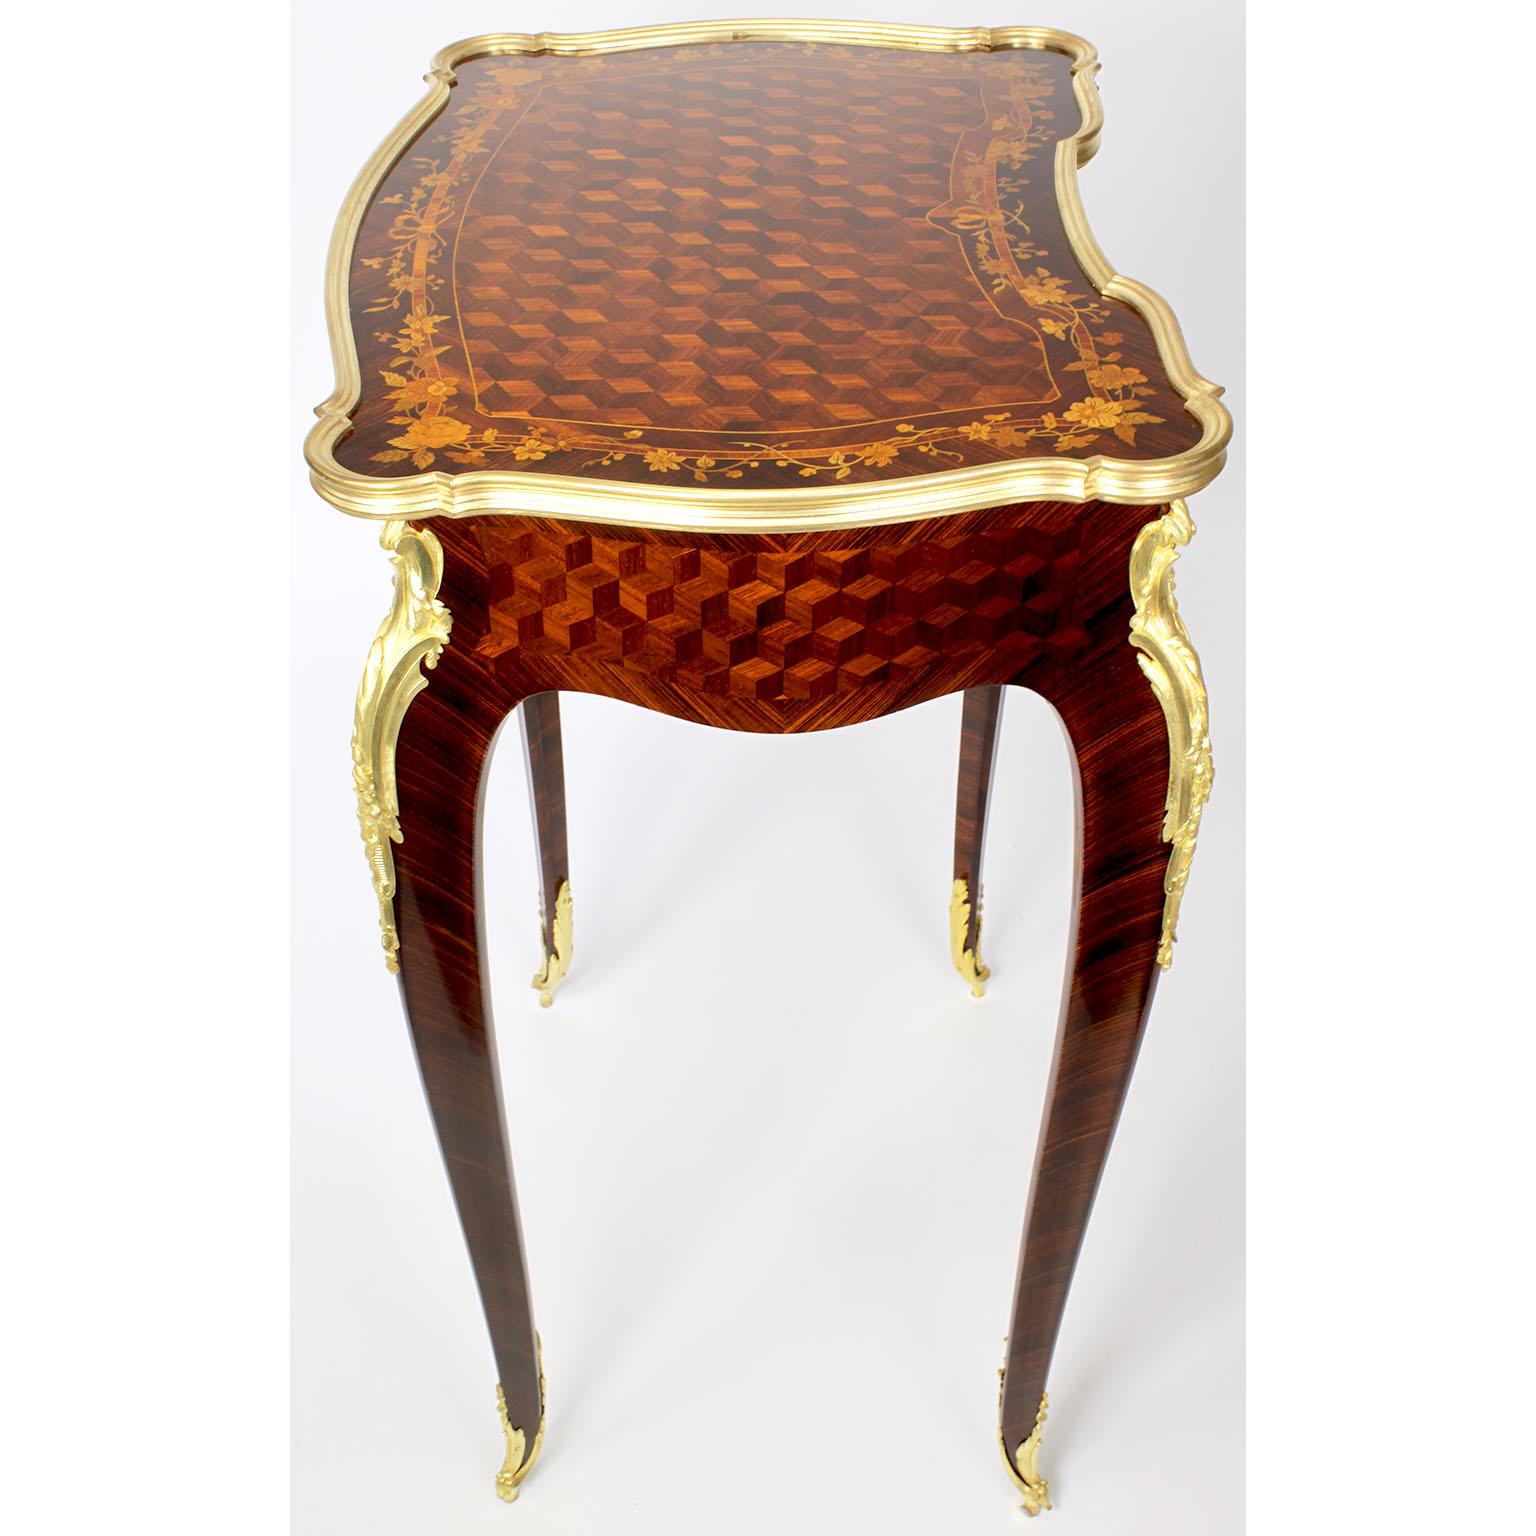 Fine French Louis XV Style Ormolu Mounted Marquetry Side-Table by François Linke For Sale 1